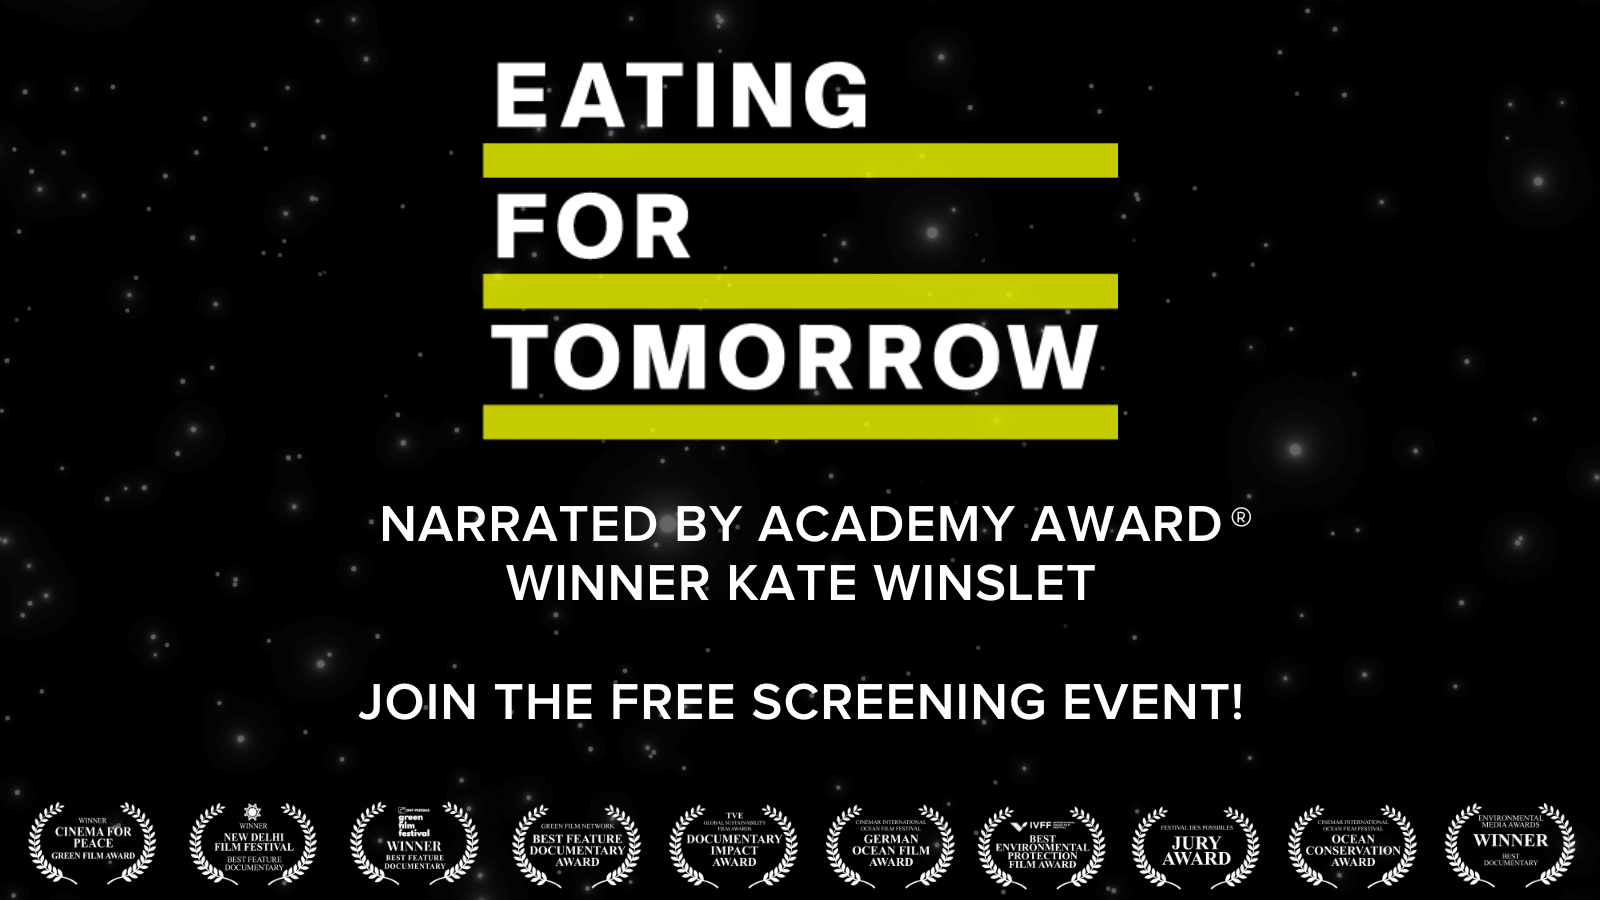 Eating for Tomorrow Narrated by Academy Award Winner Kate Winslet - Join Free Screening Event